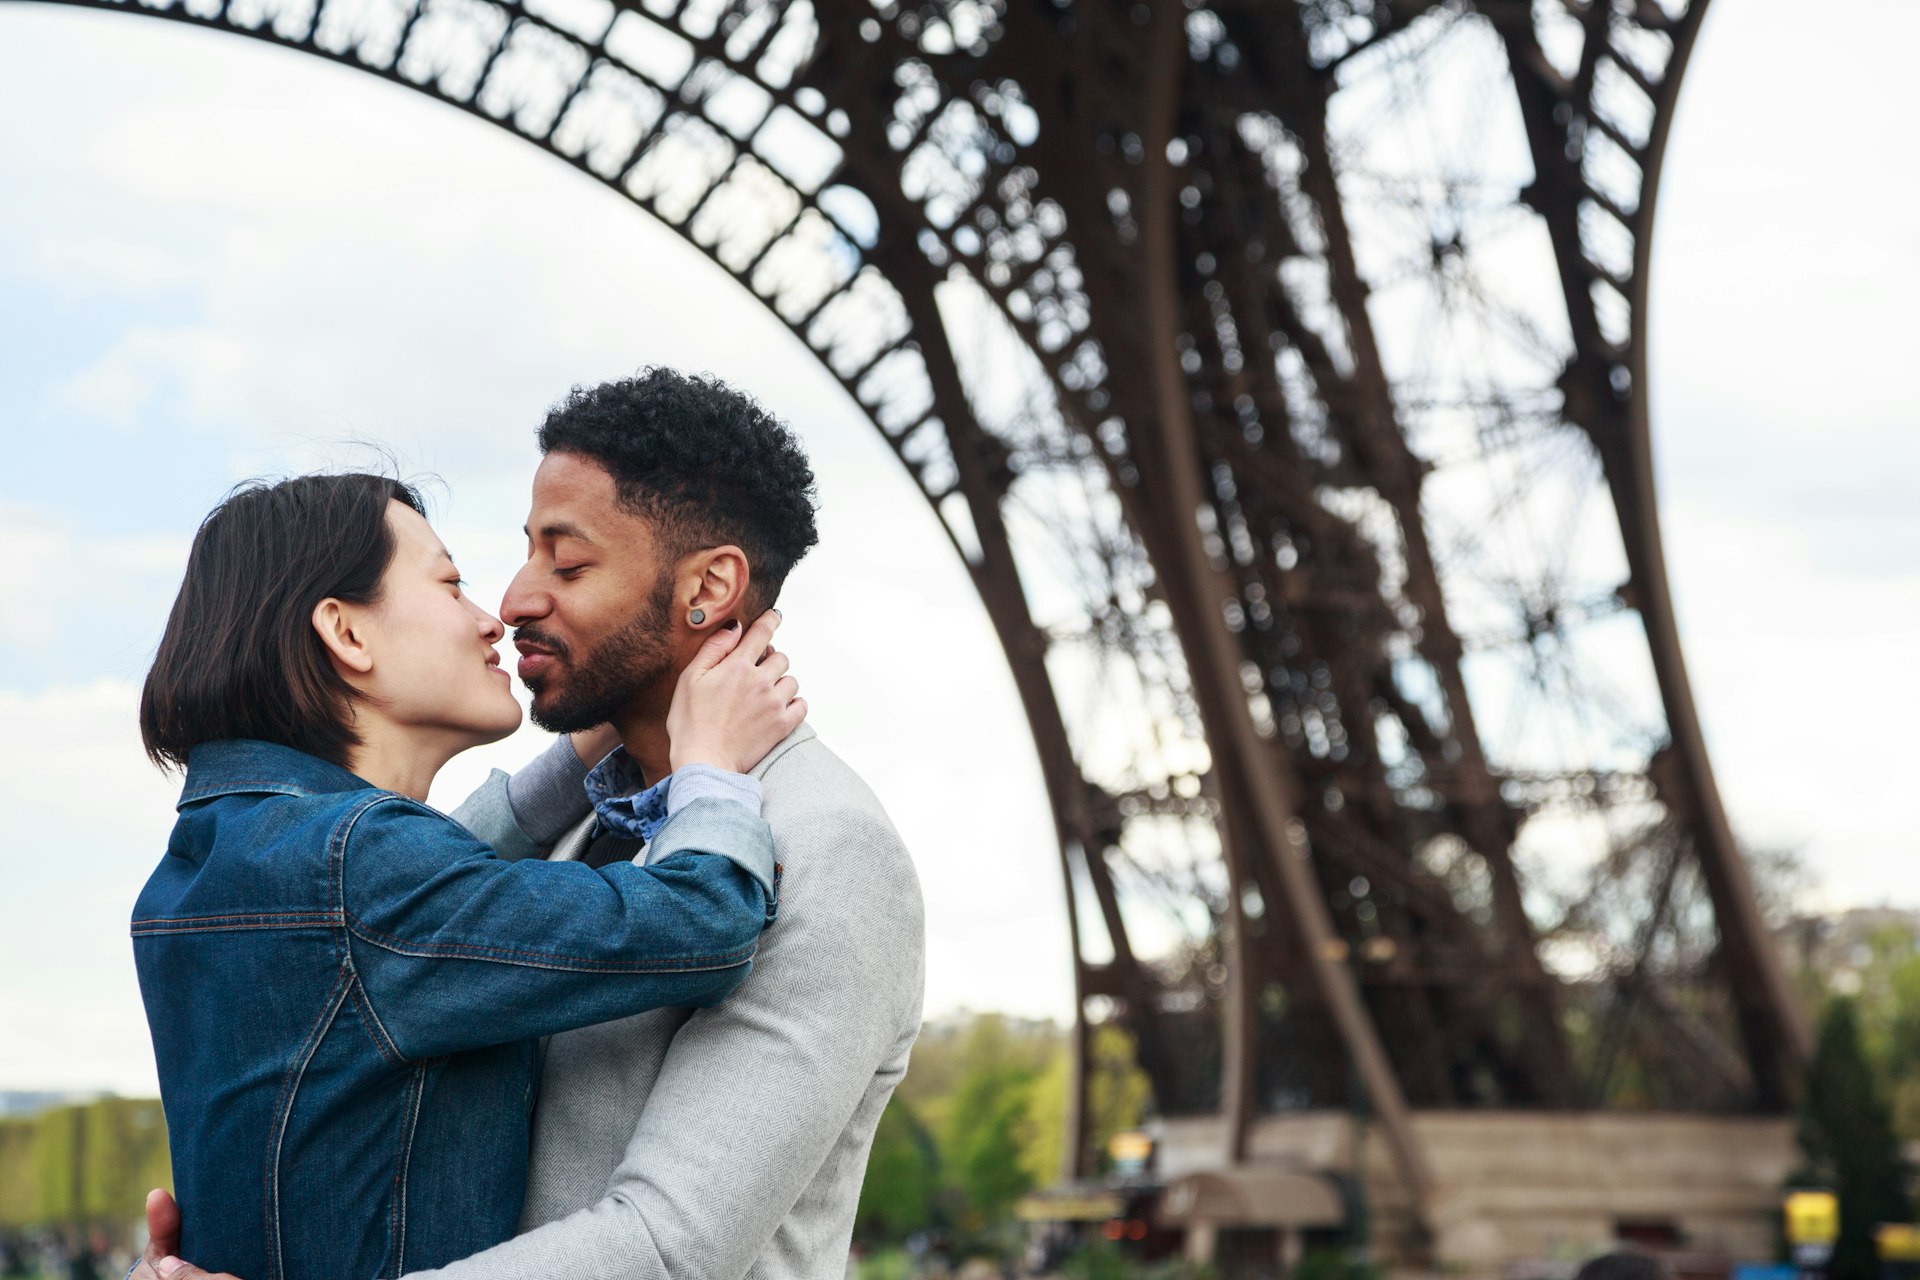 A couple embracing for a kiss under the Eiffel Tower, Paris, France